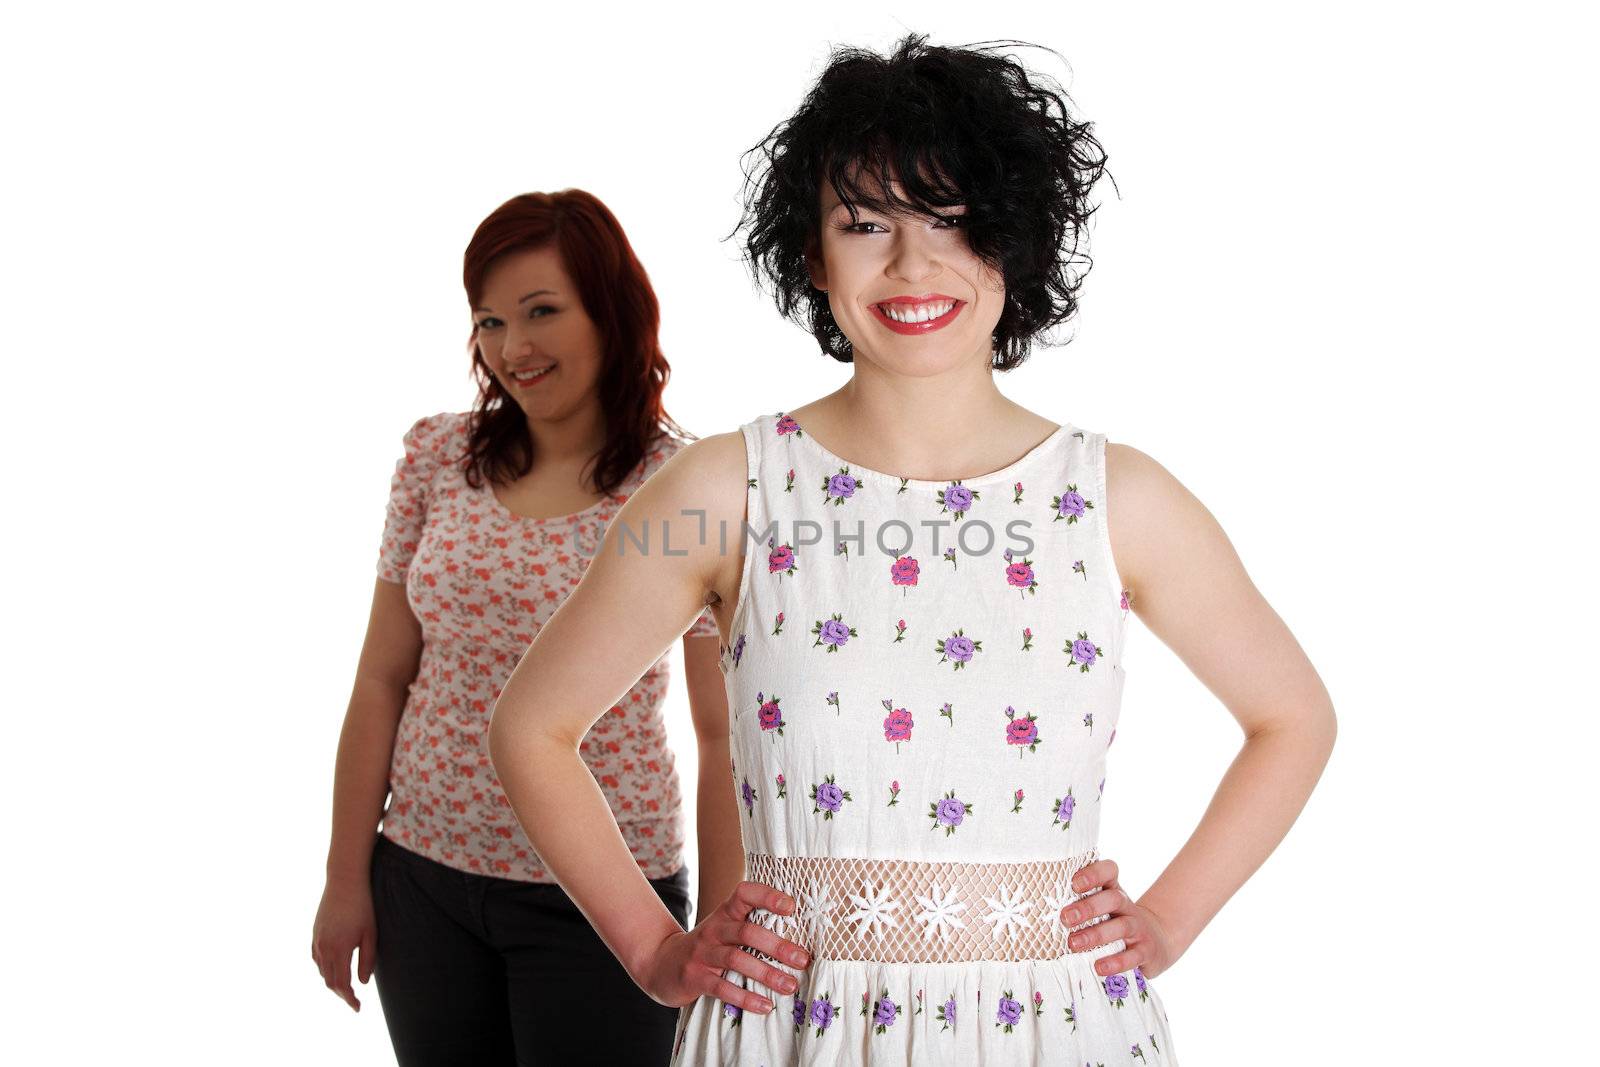 Two happy woman posing over white background.